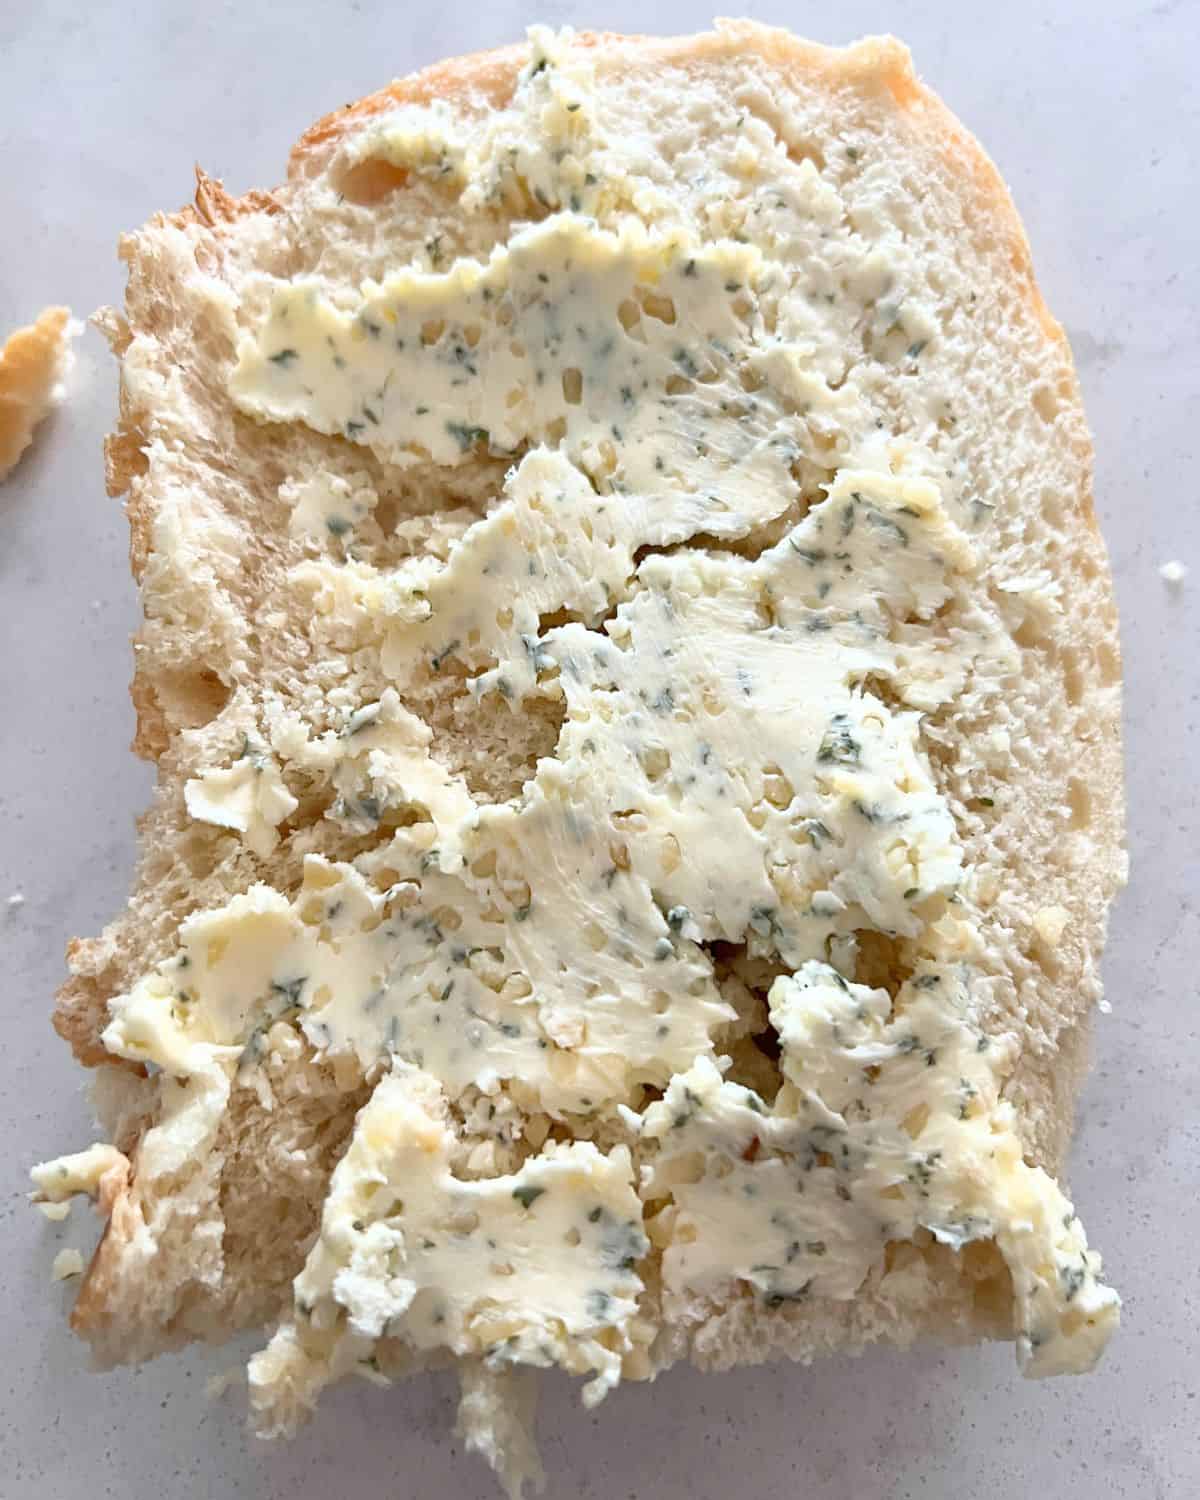 Butter, garlic, and seasoning mixed together in a bowl spread on the bread. 